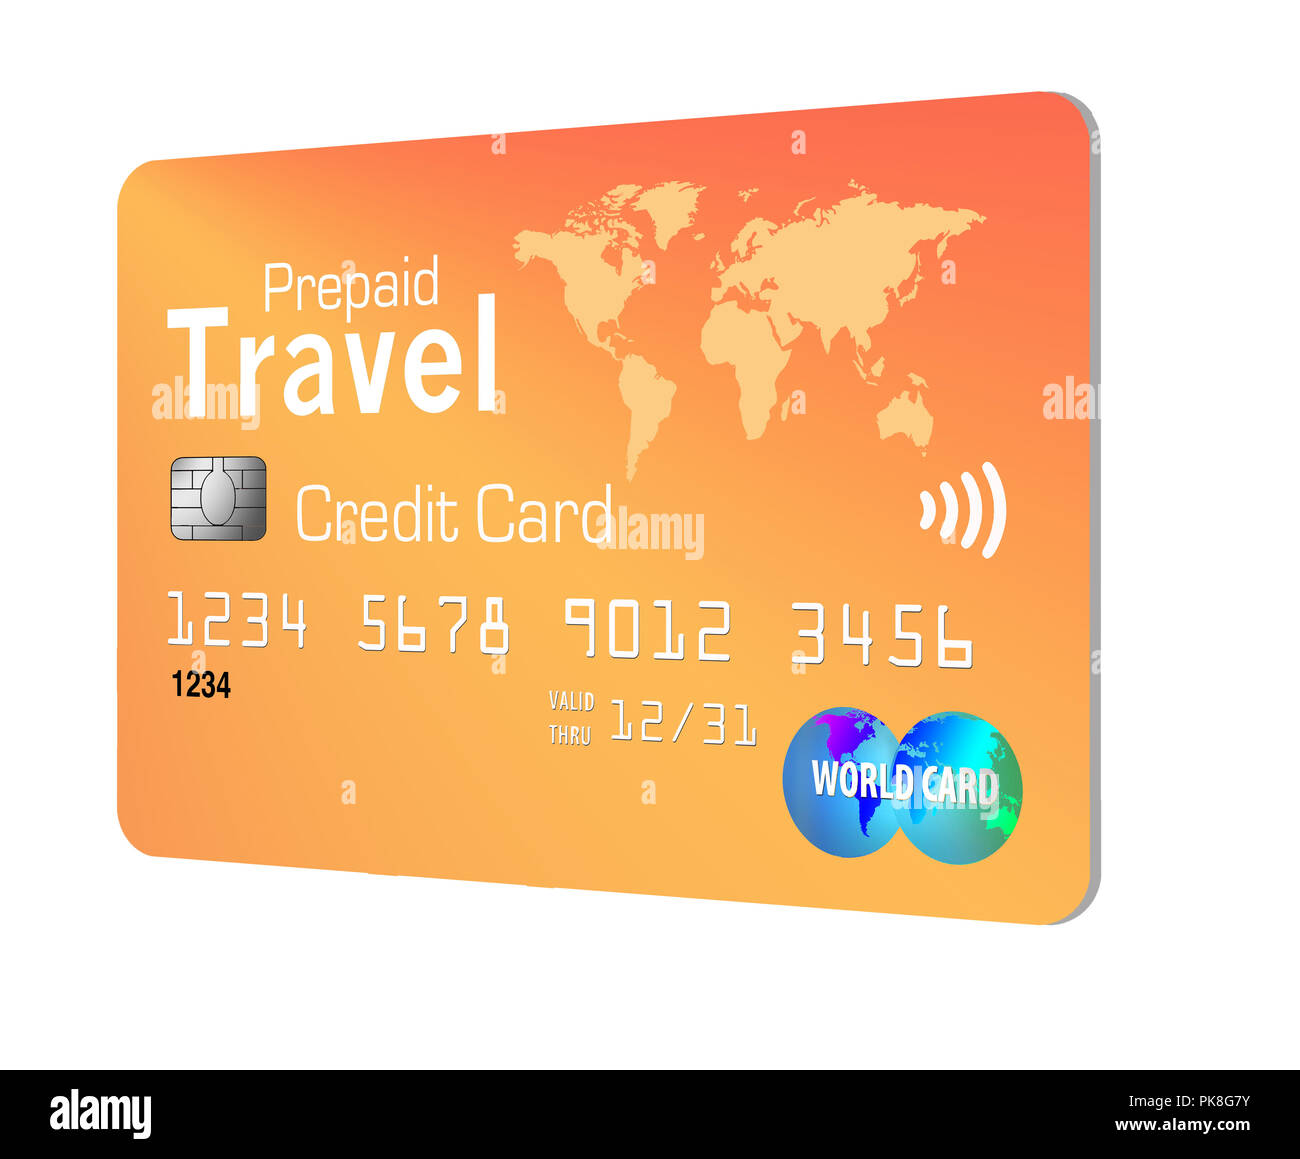 Prepaid Credit High Resolution Stock Photography and Images - Alamy